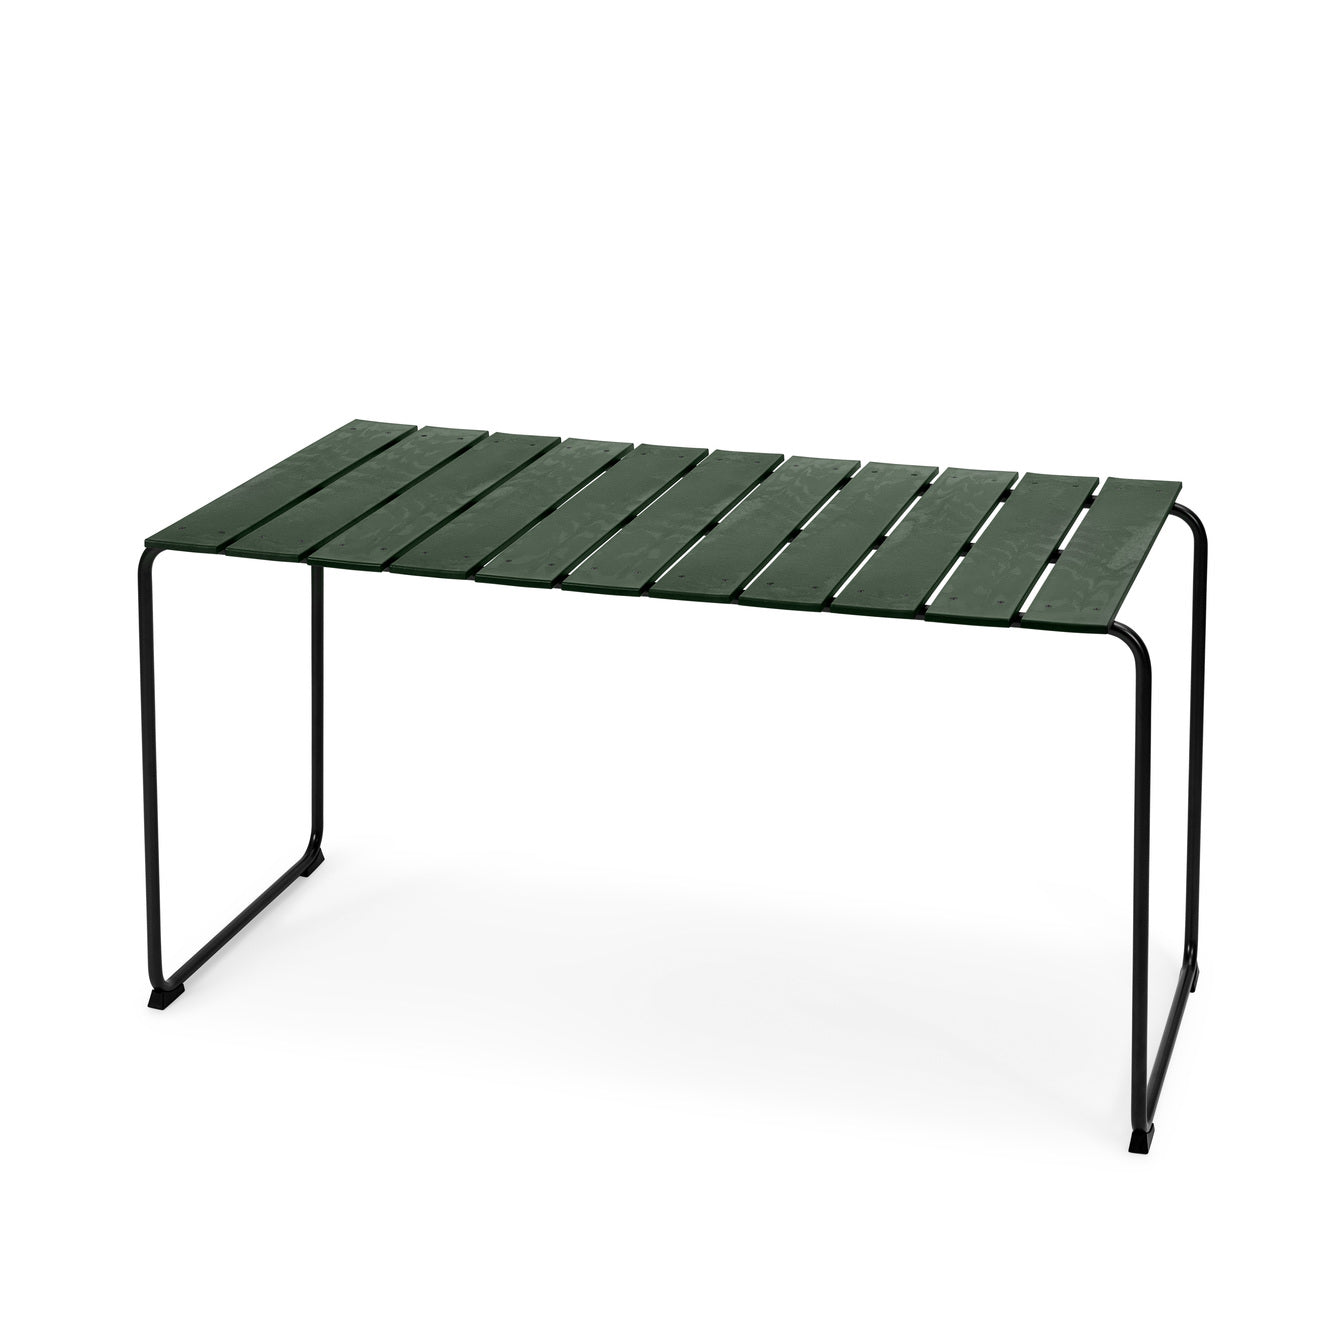 Mater Ocean OC2 Table - 4 Person